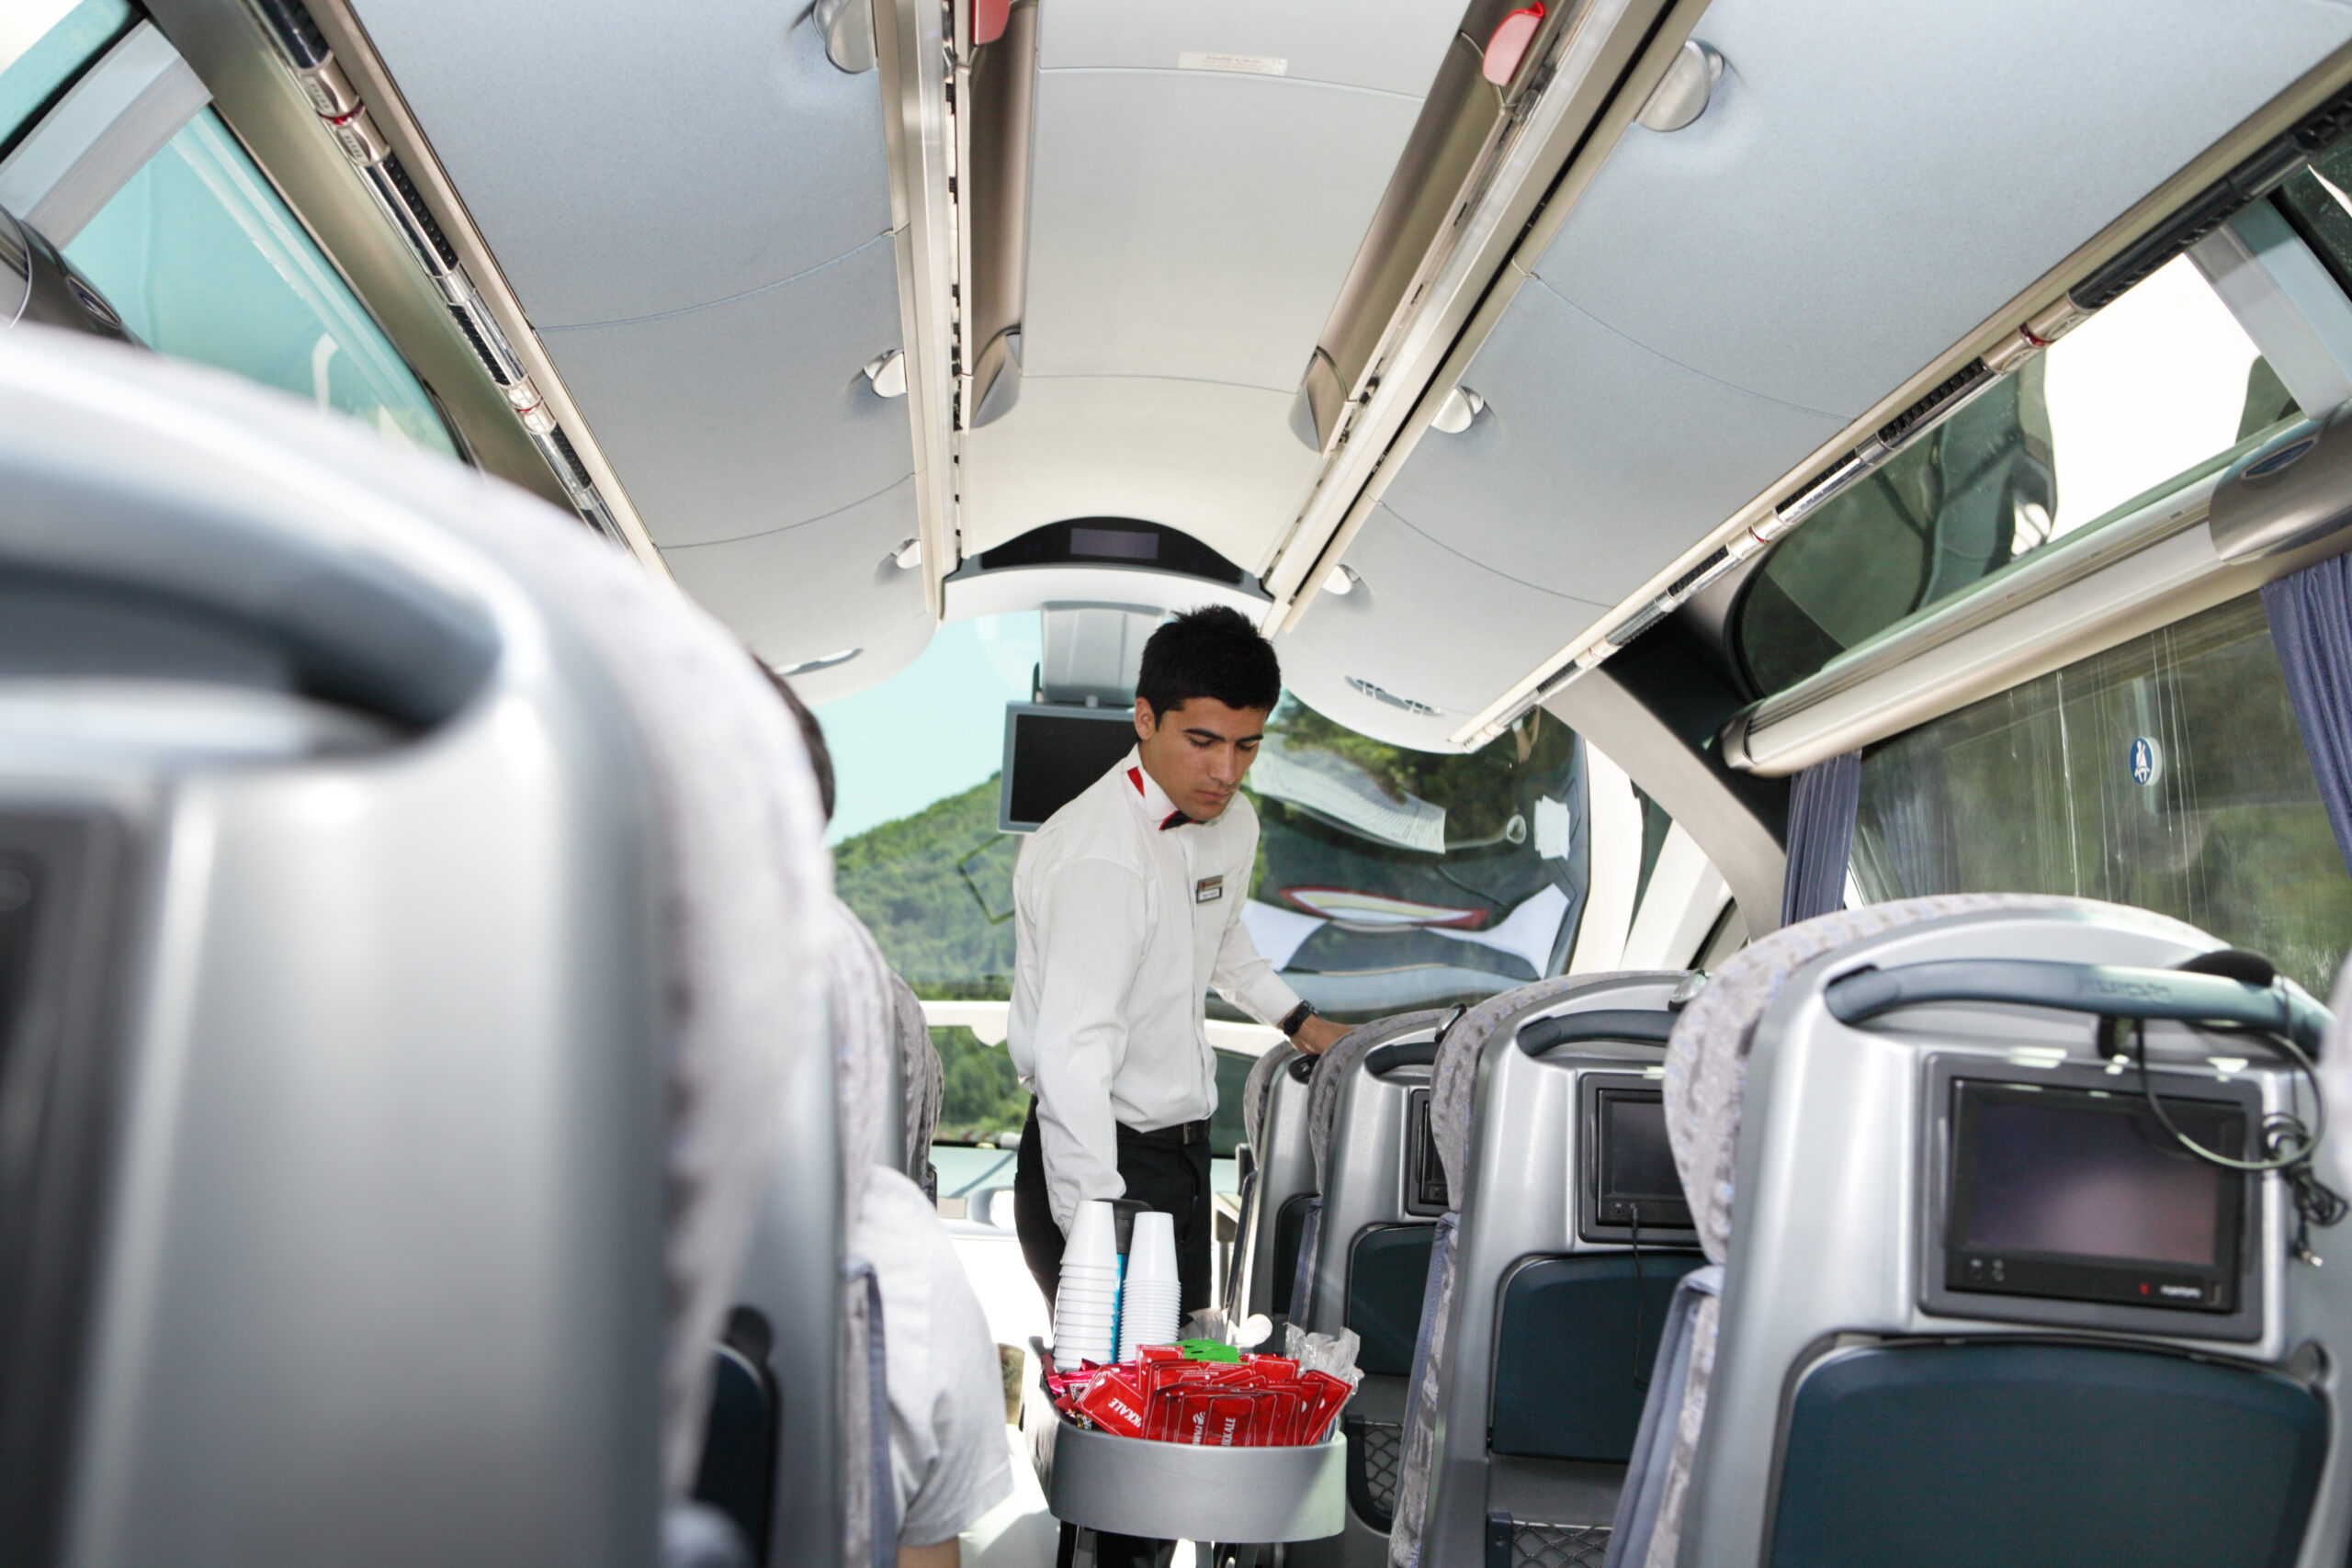 Steward serves drinks to passengers during the travel in charter empire luxury buss